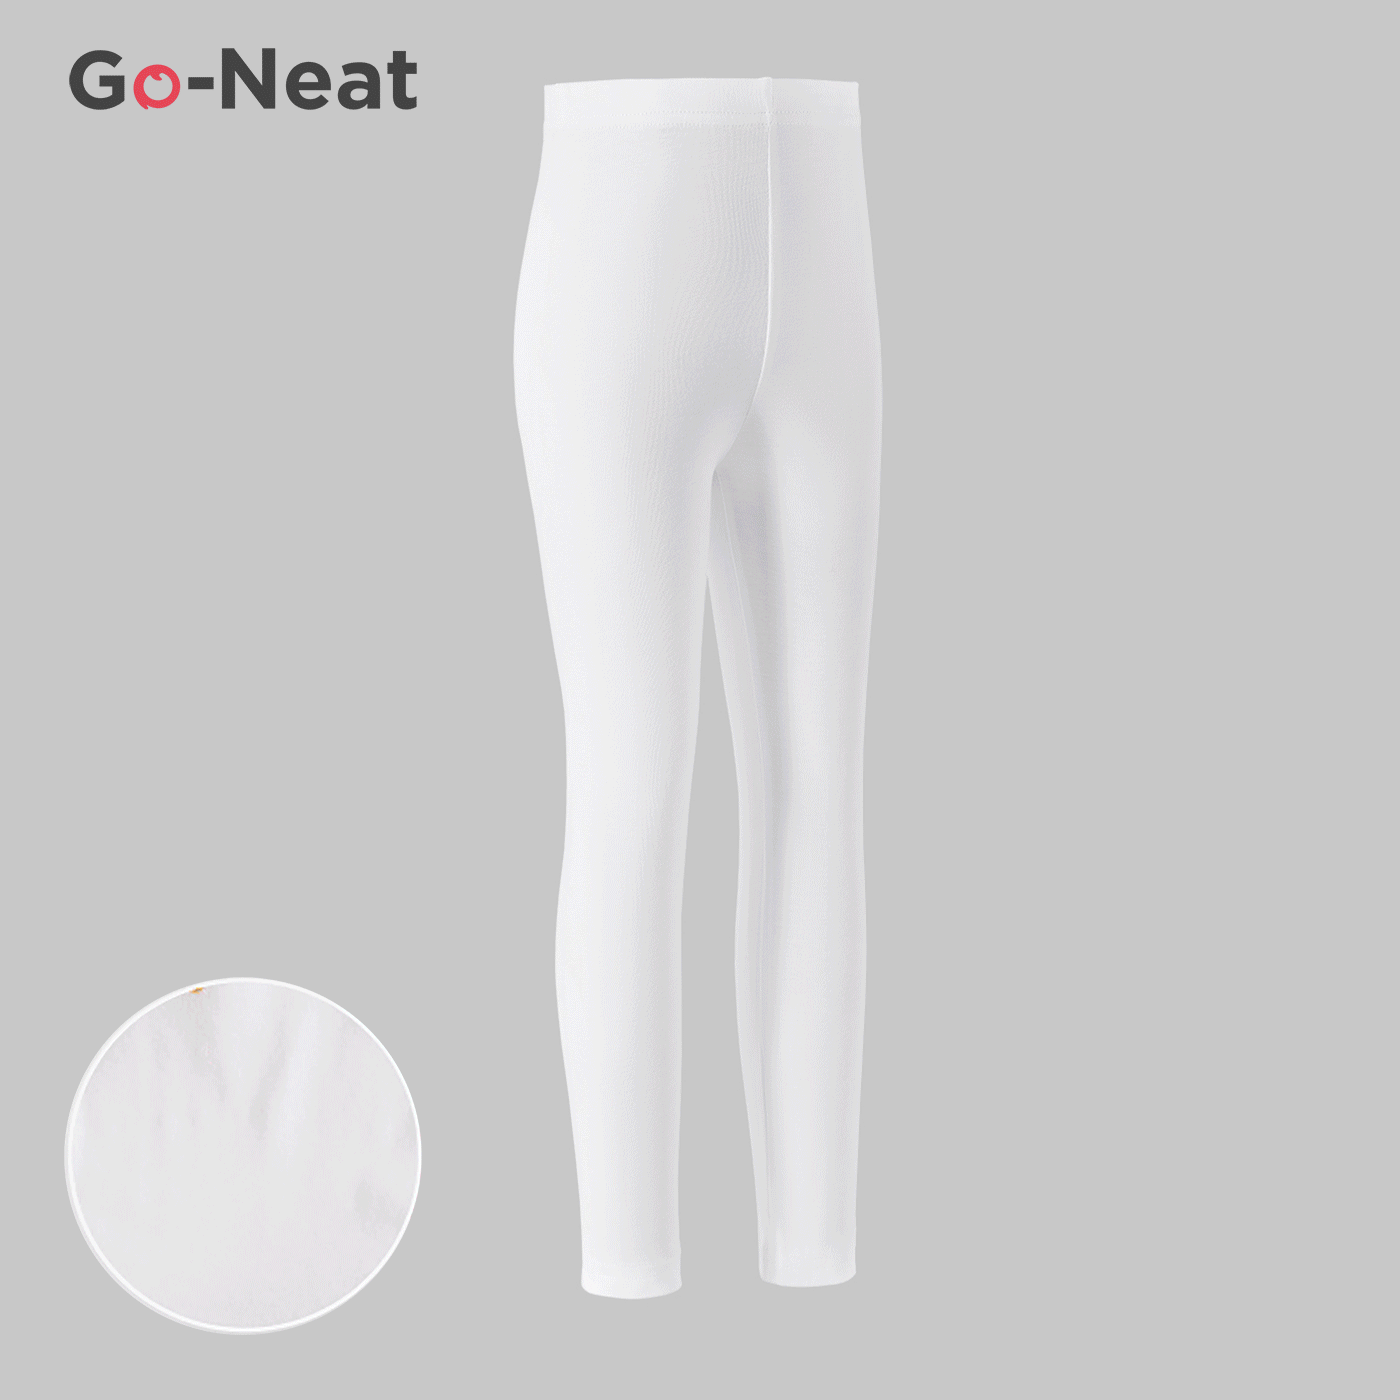 Go-Neat Water Repellent And Stain Resistant Mommy And Me 95% Cotton Solid Leggings